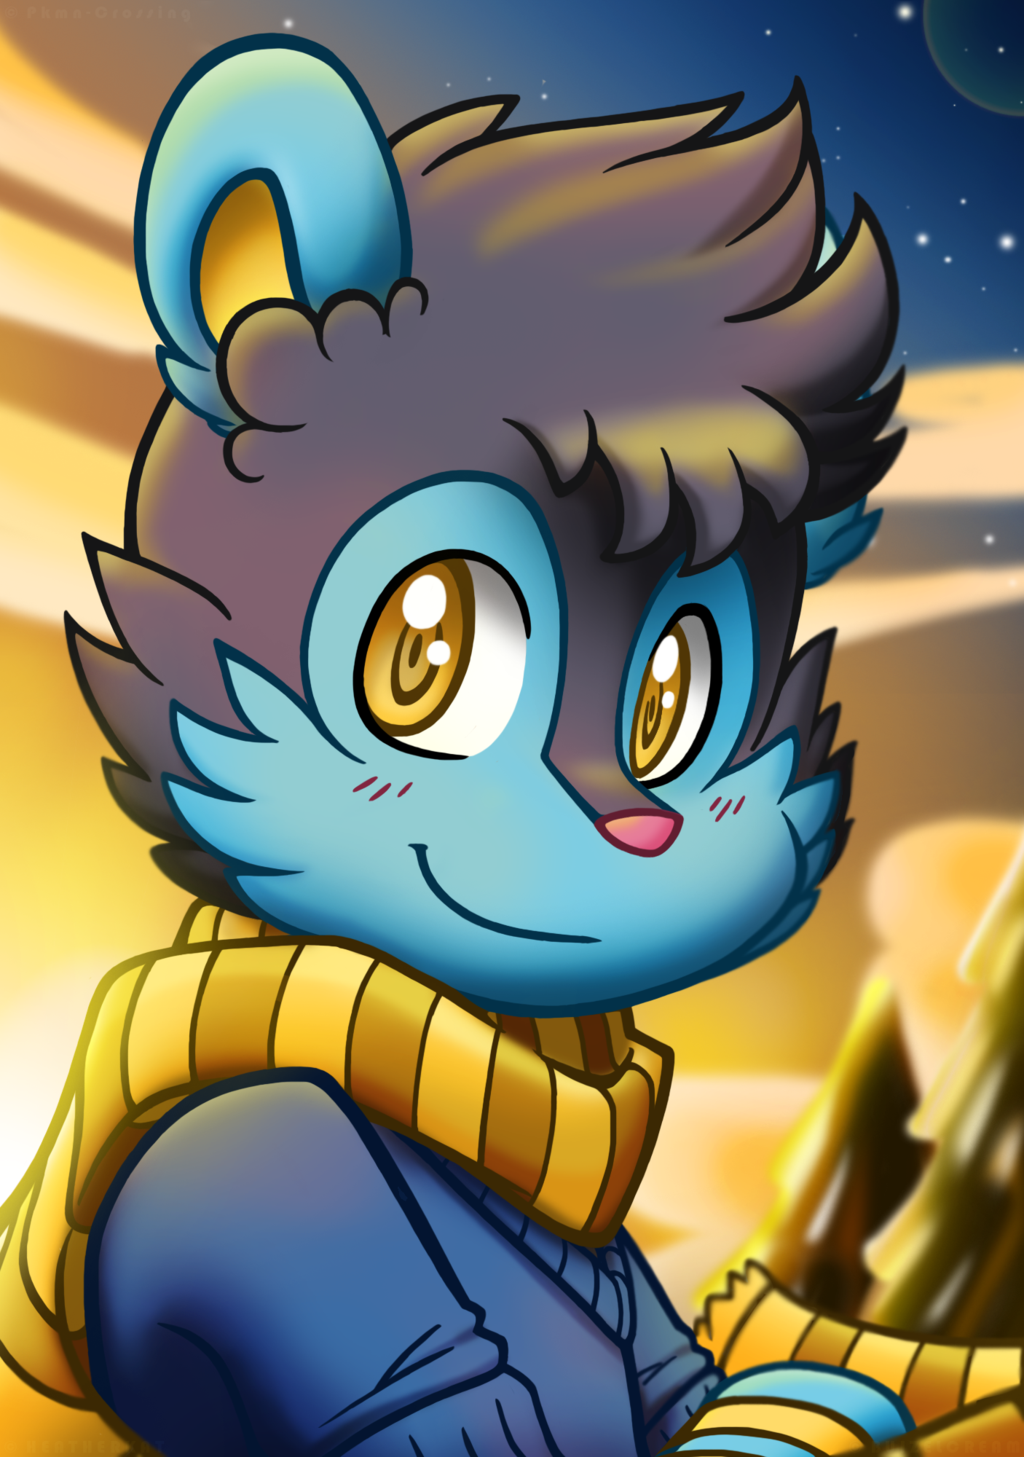 Bennet The Luxio by BuizelCream on DeviantArt